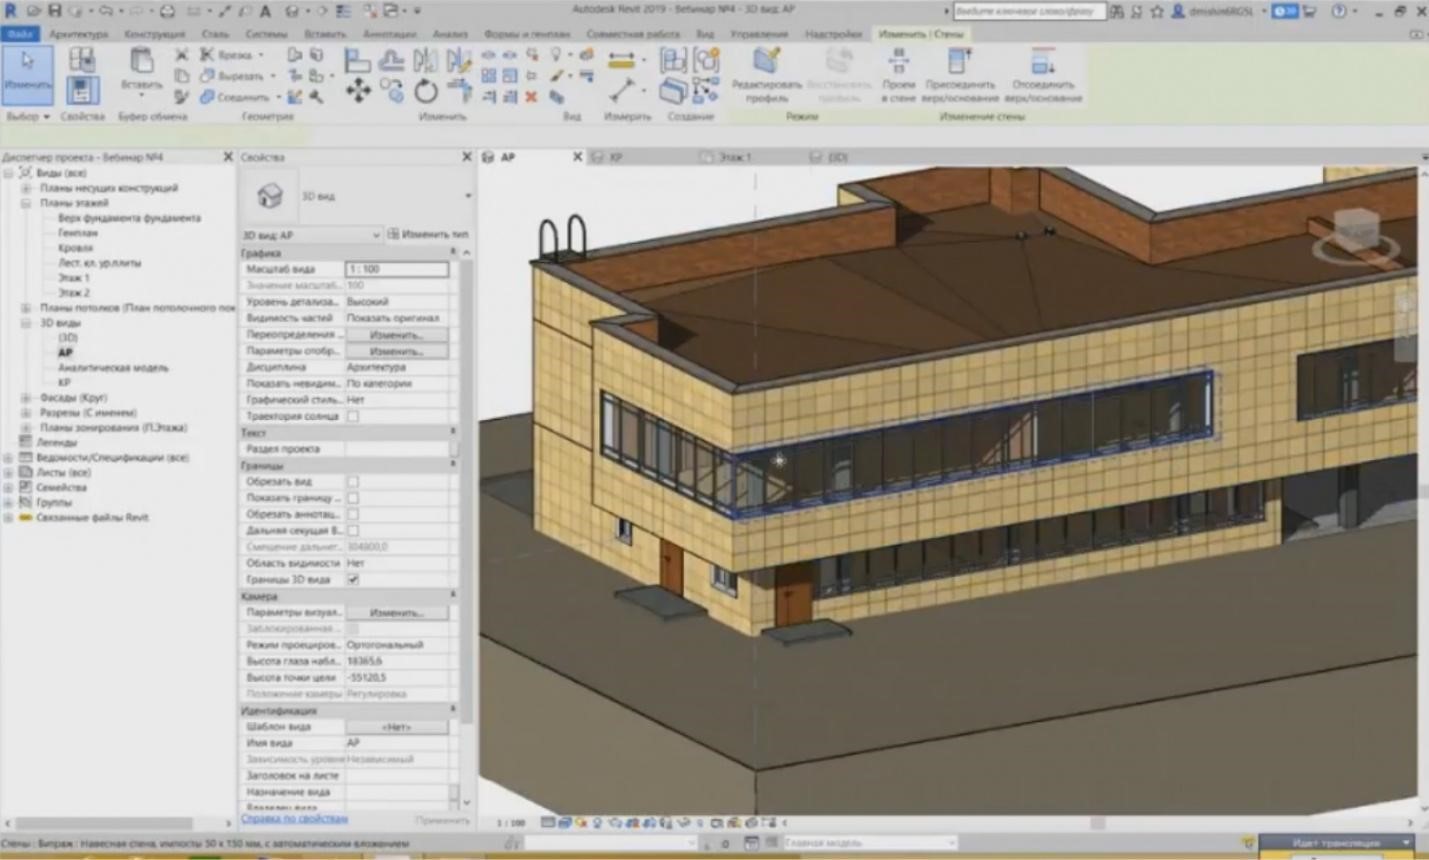 BIM DESIGN IN REVIT. CREATING ARCHITECTURAL AND STRUCTURAL ELEMENTS. PAGE 2-23